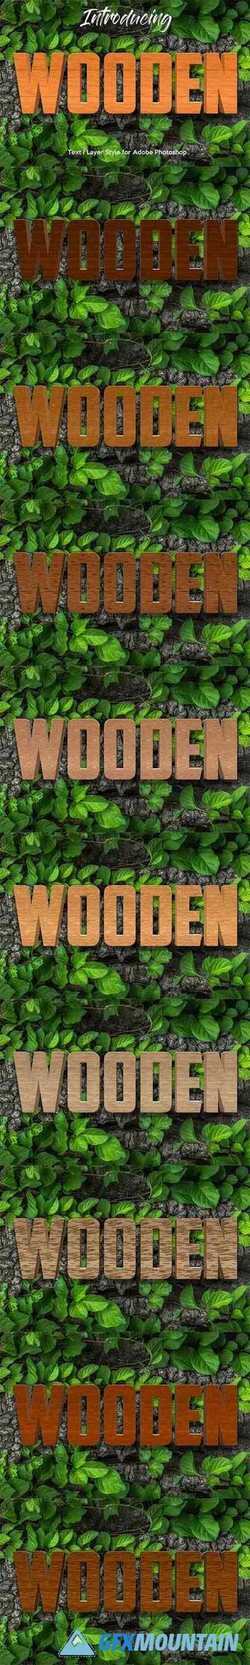 10 Wood Style for Photoshop 3454376